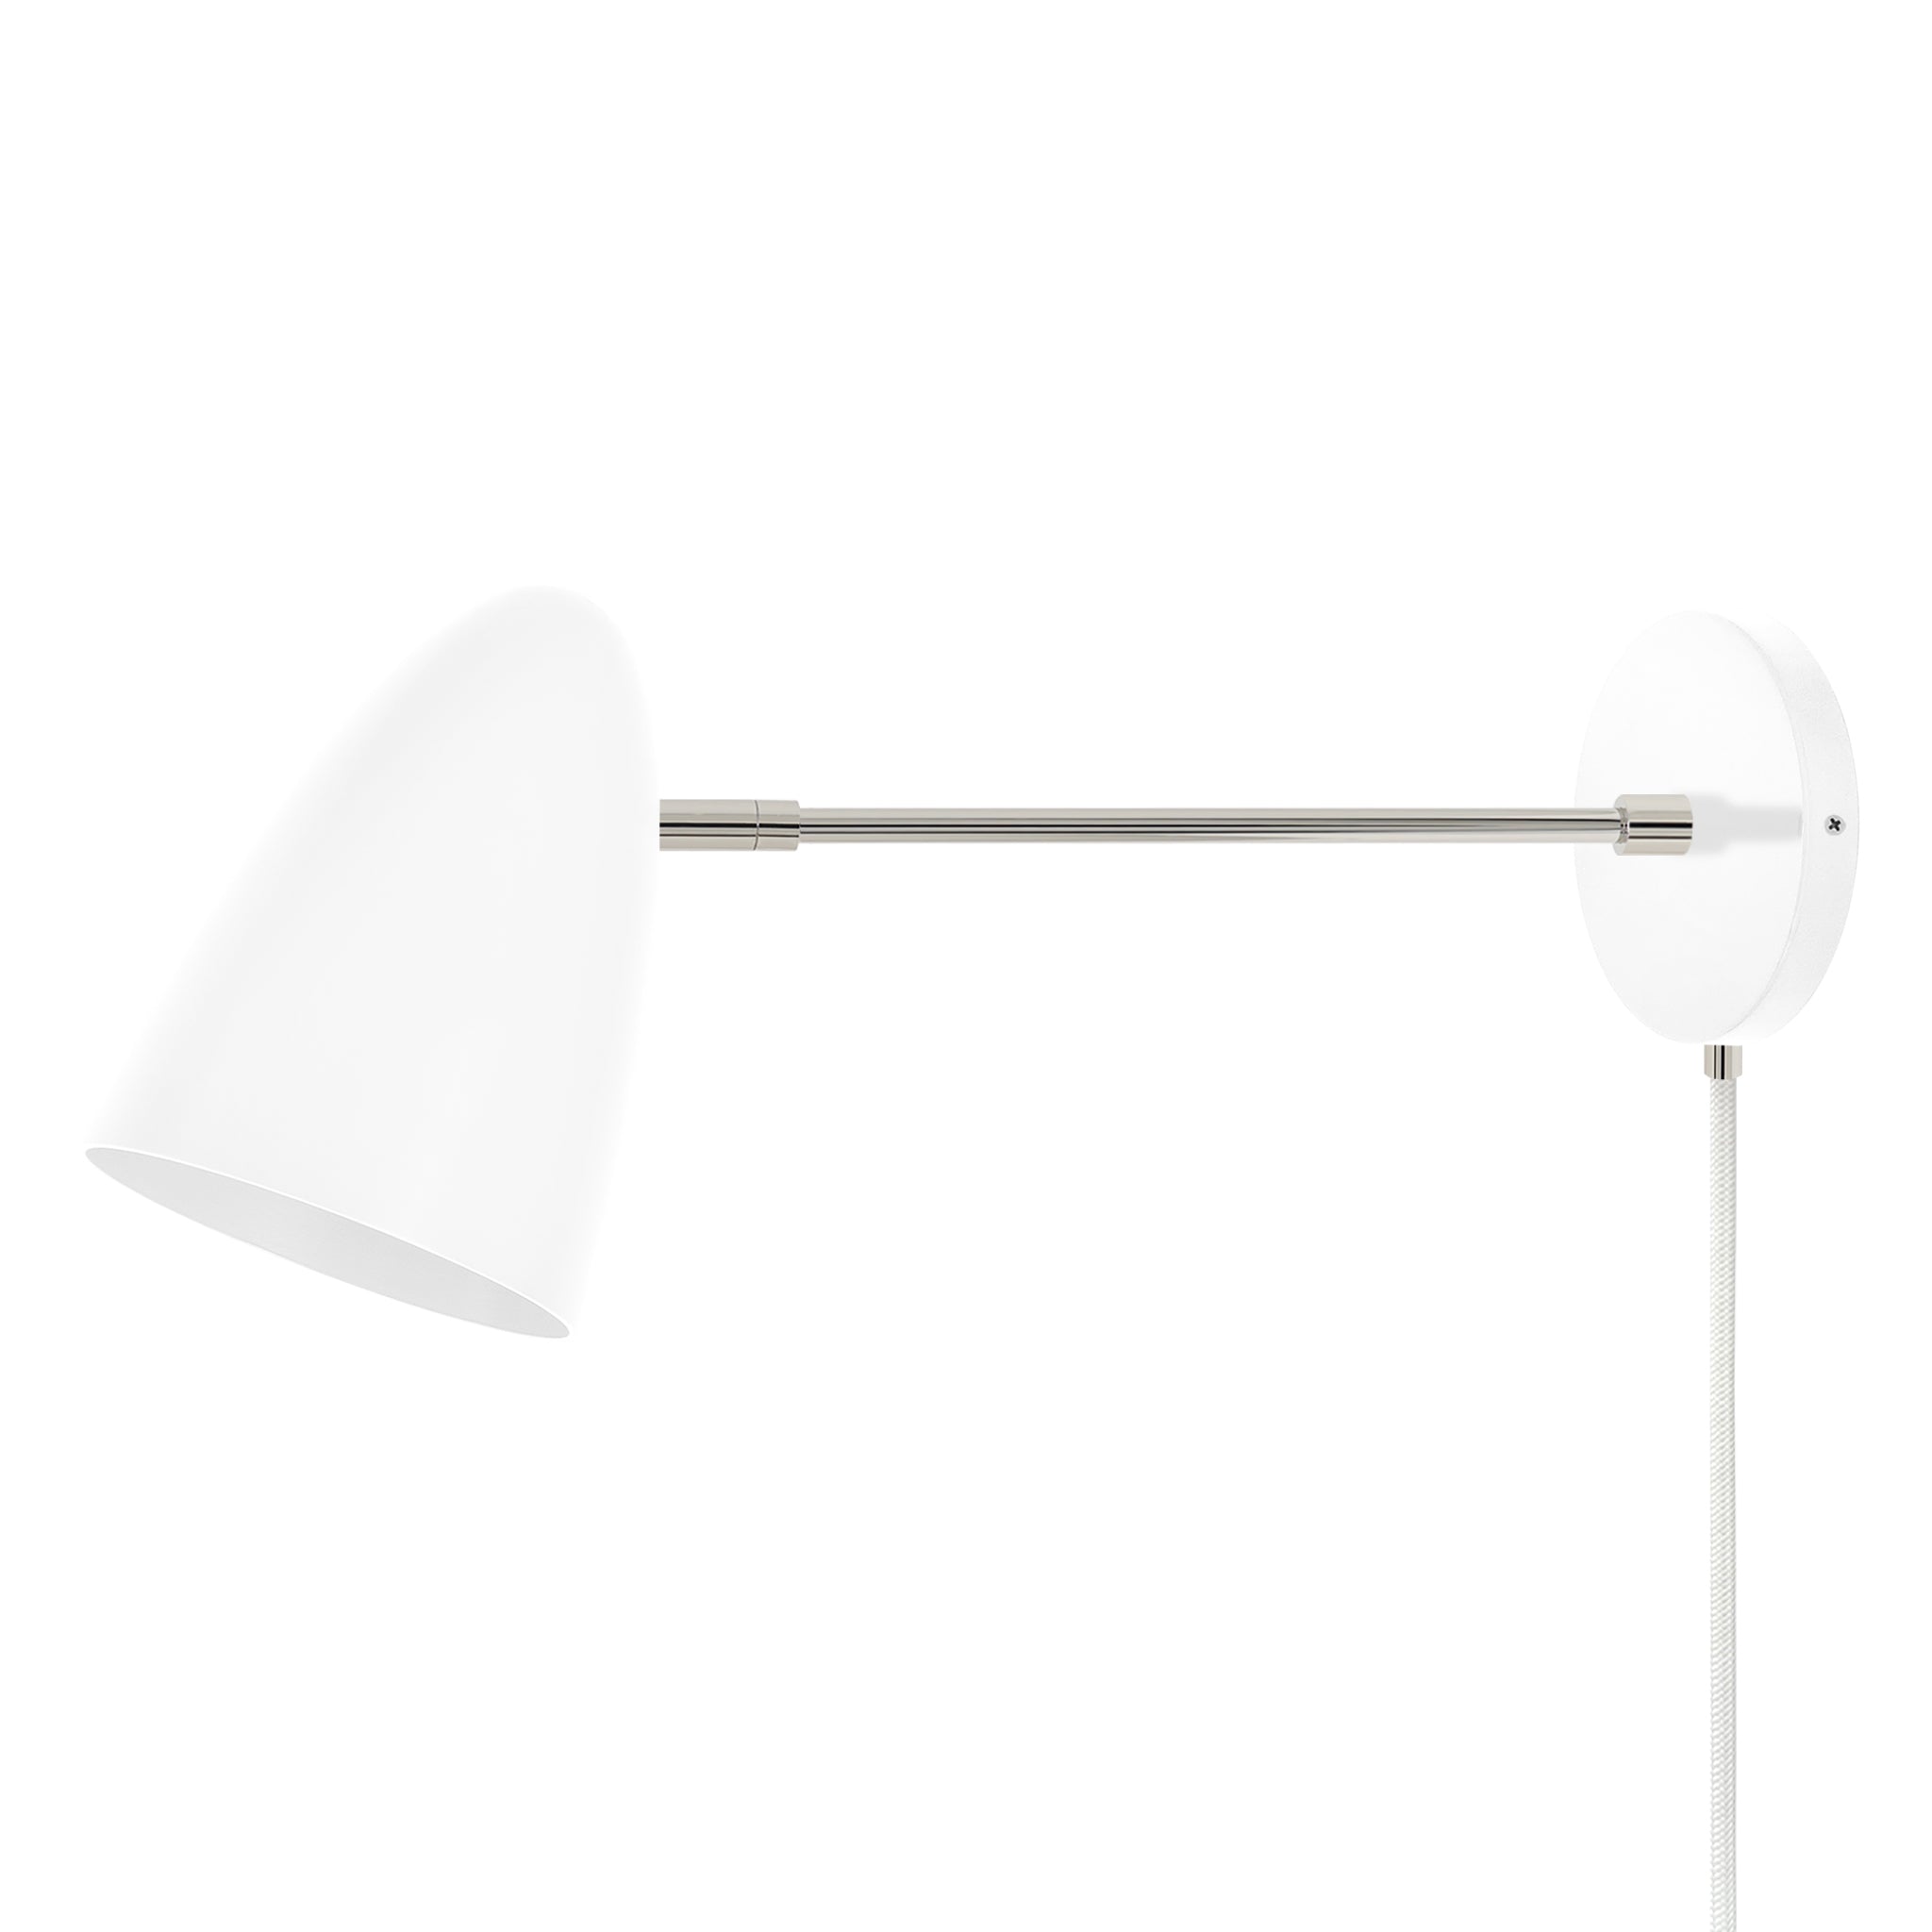 Nickel and white color Boom plug-in sconce 10" arm Dutton Brown lighting